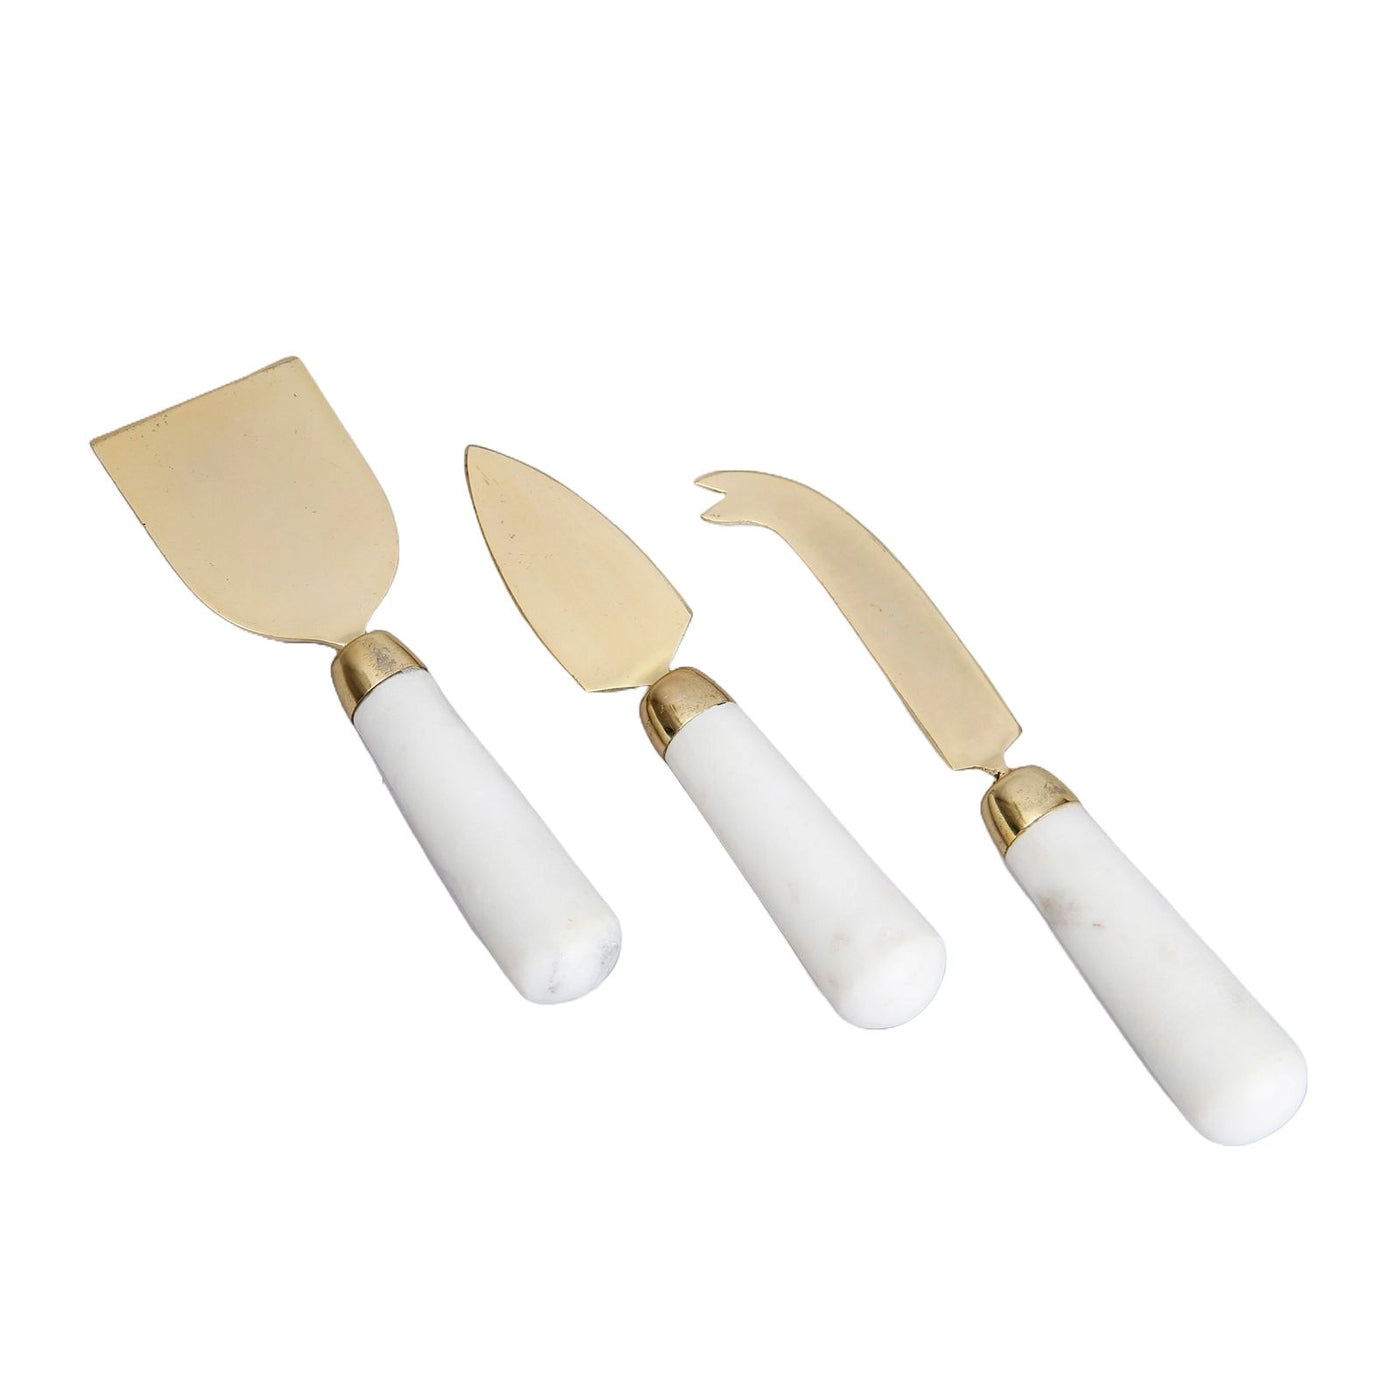 Gold-Plated Stainless Steel Cheese Knife Set With Marble Handle - Set of 3